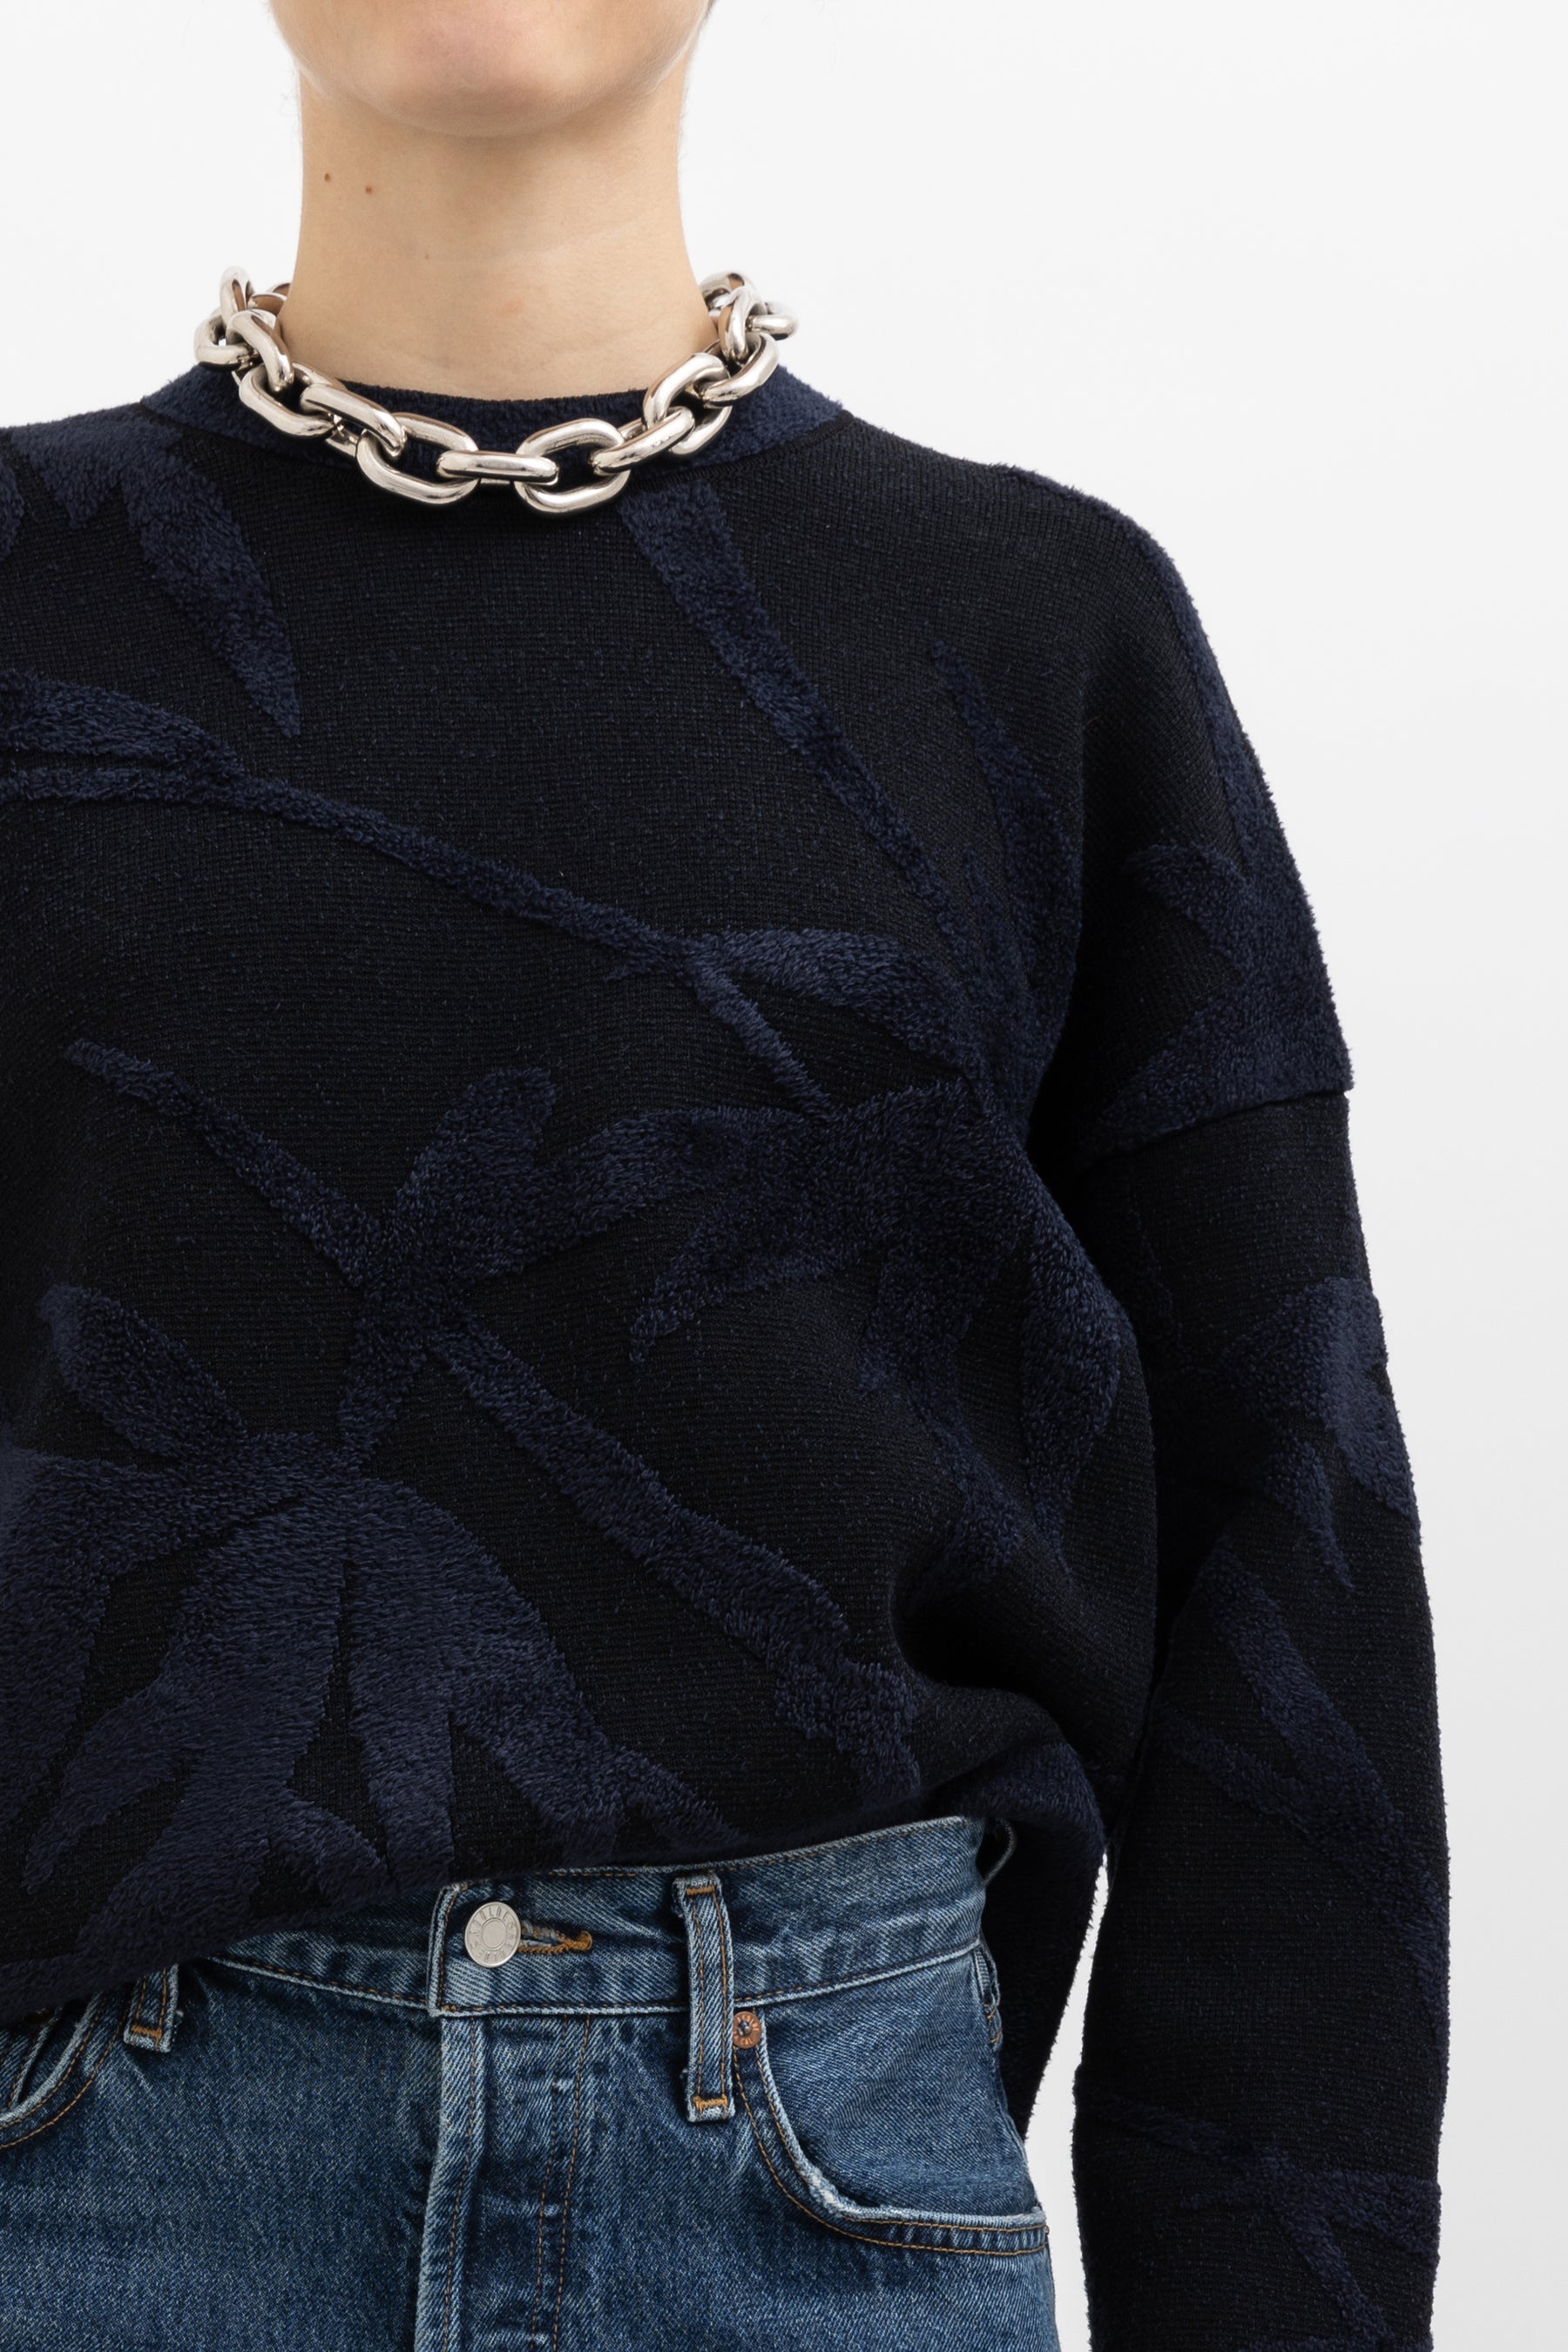 scanlan-theodore-navy-knitted-velour-detail-jumper-s-76ea